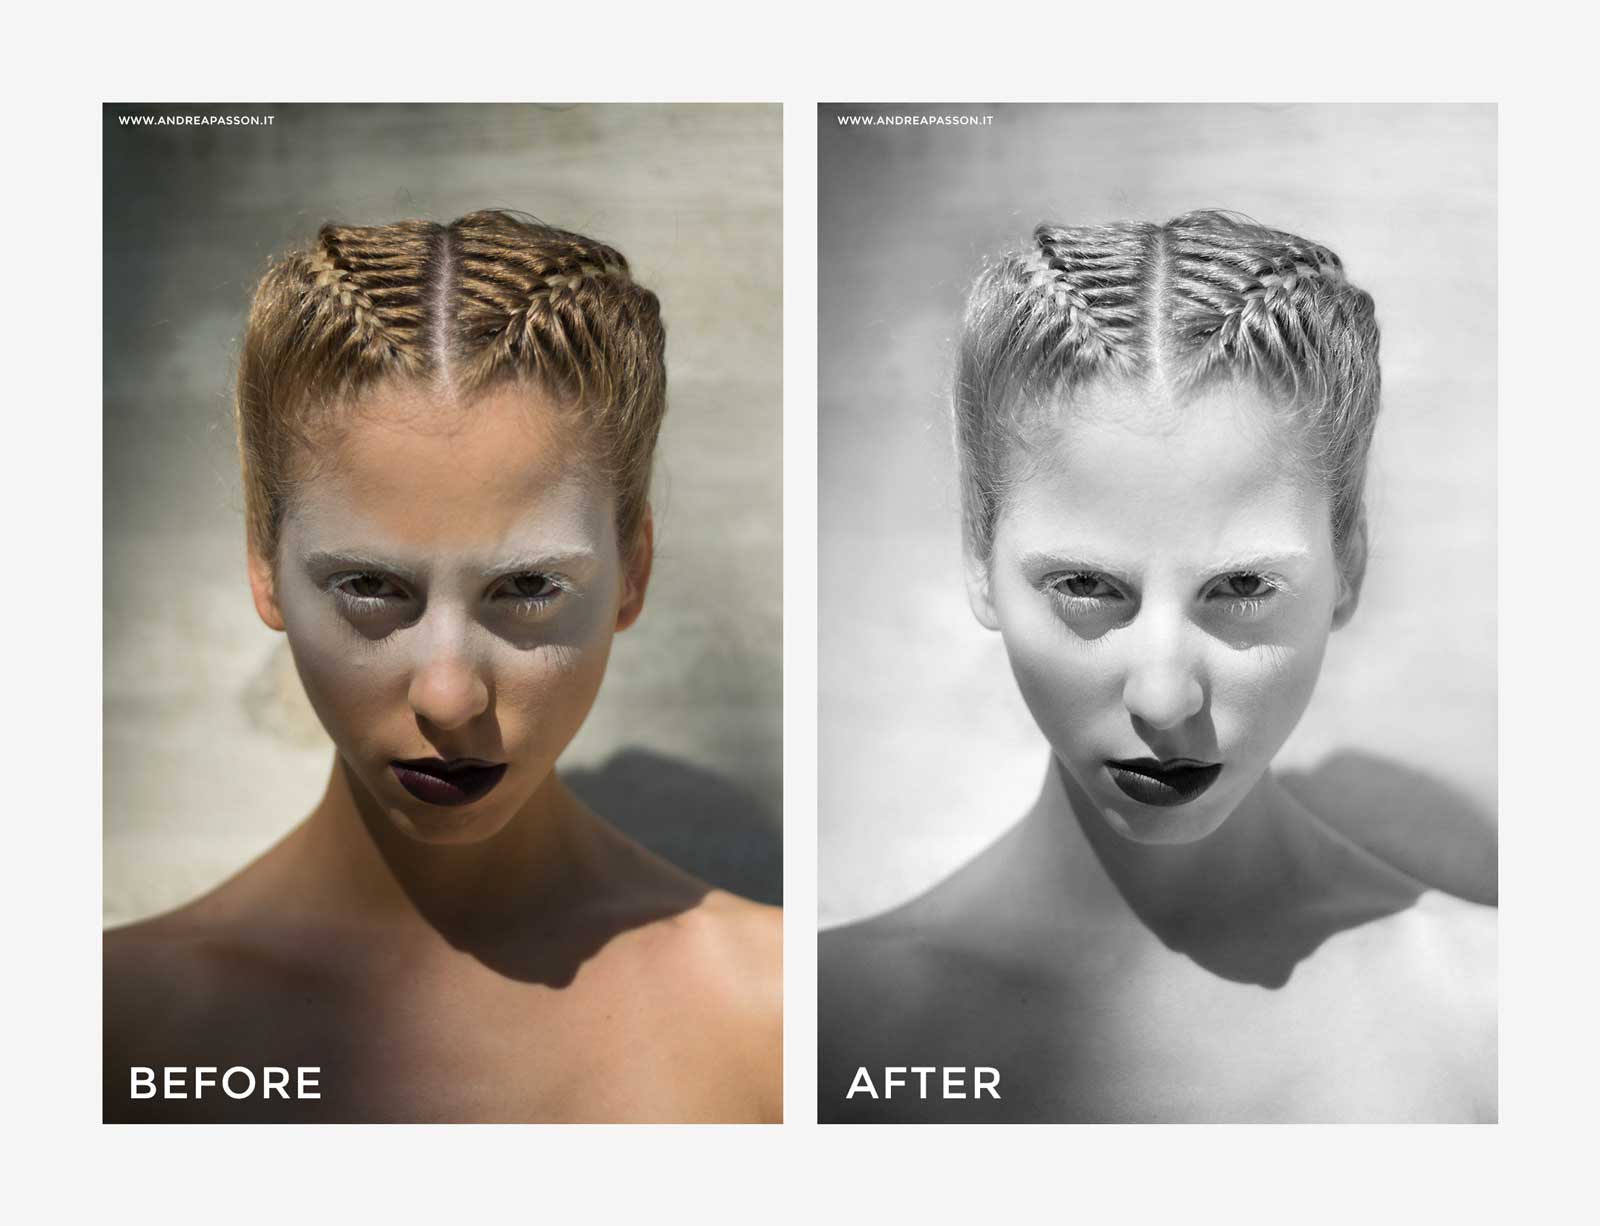 Before & After - Post Produzione Fotografica Professionale a Treviso - Fashion Model Hair Style and Make up